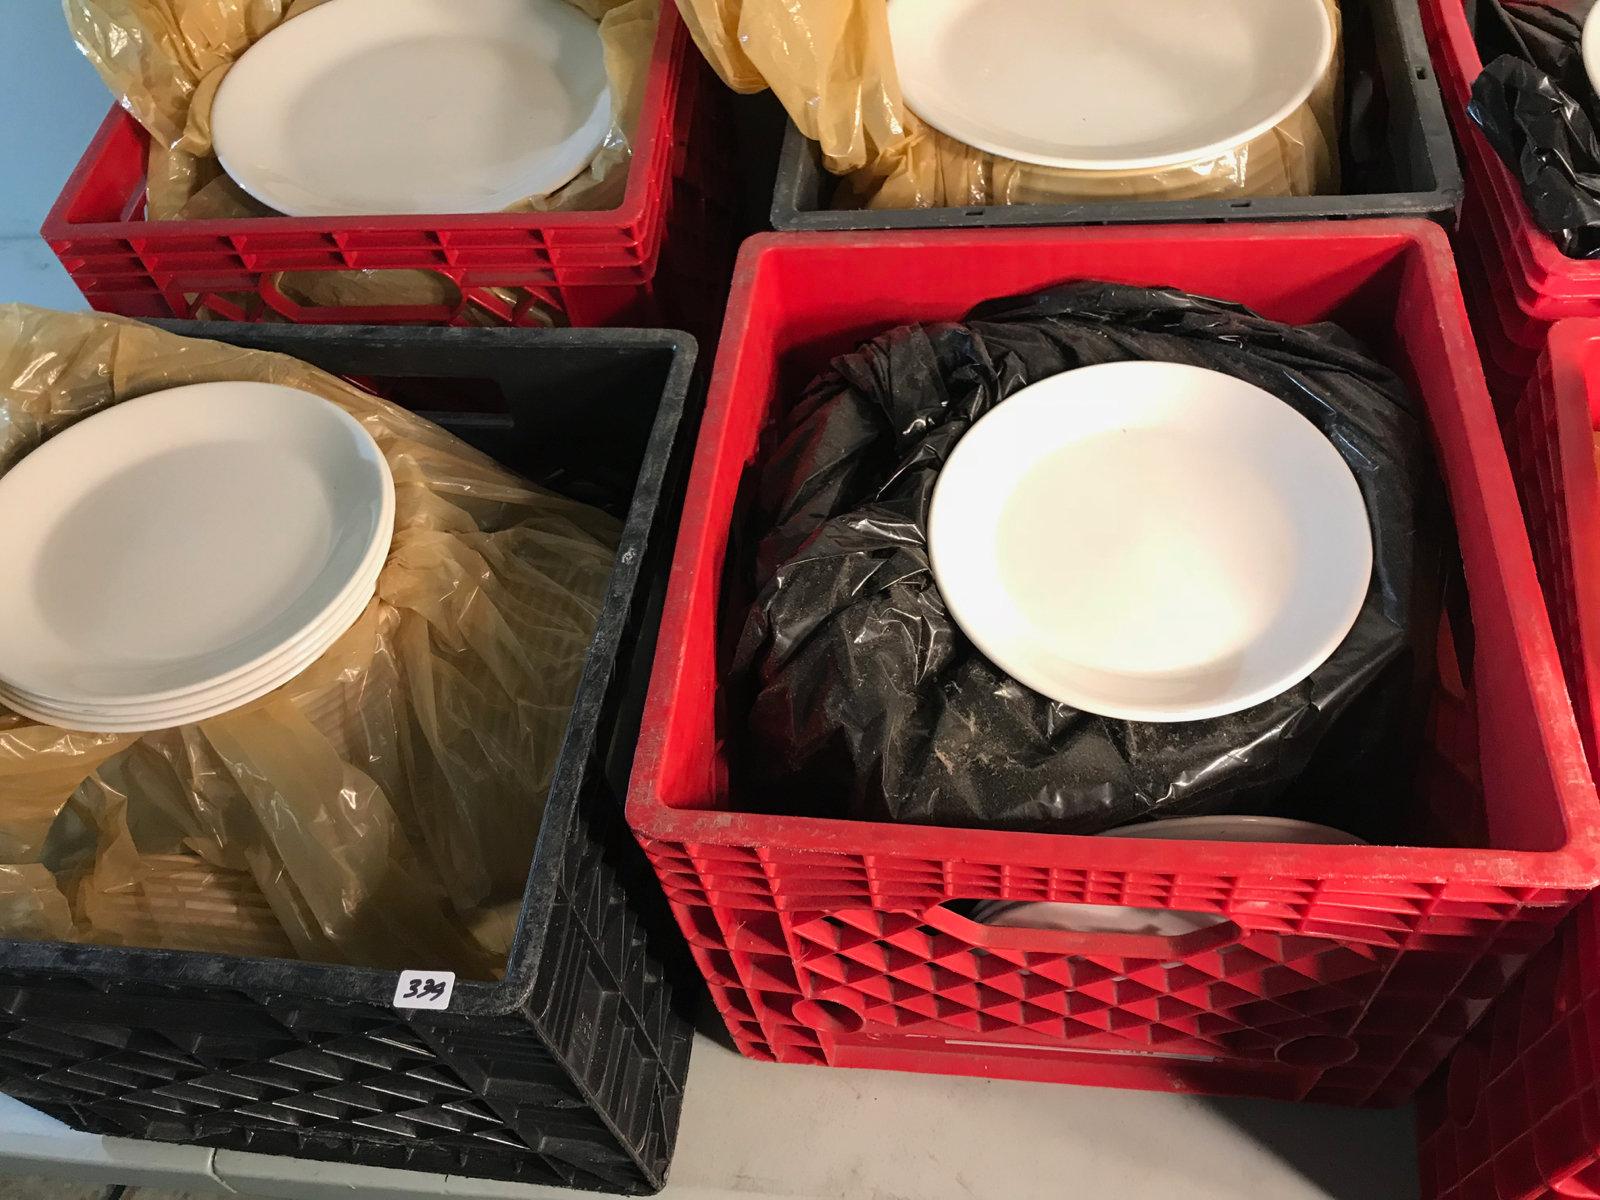 6 milk crates with various dishes, mostly dinner plates